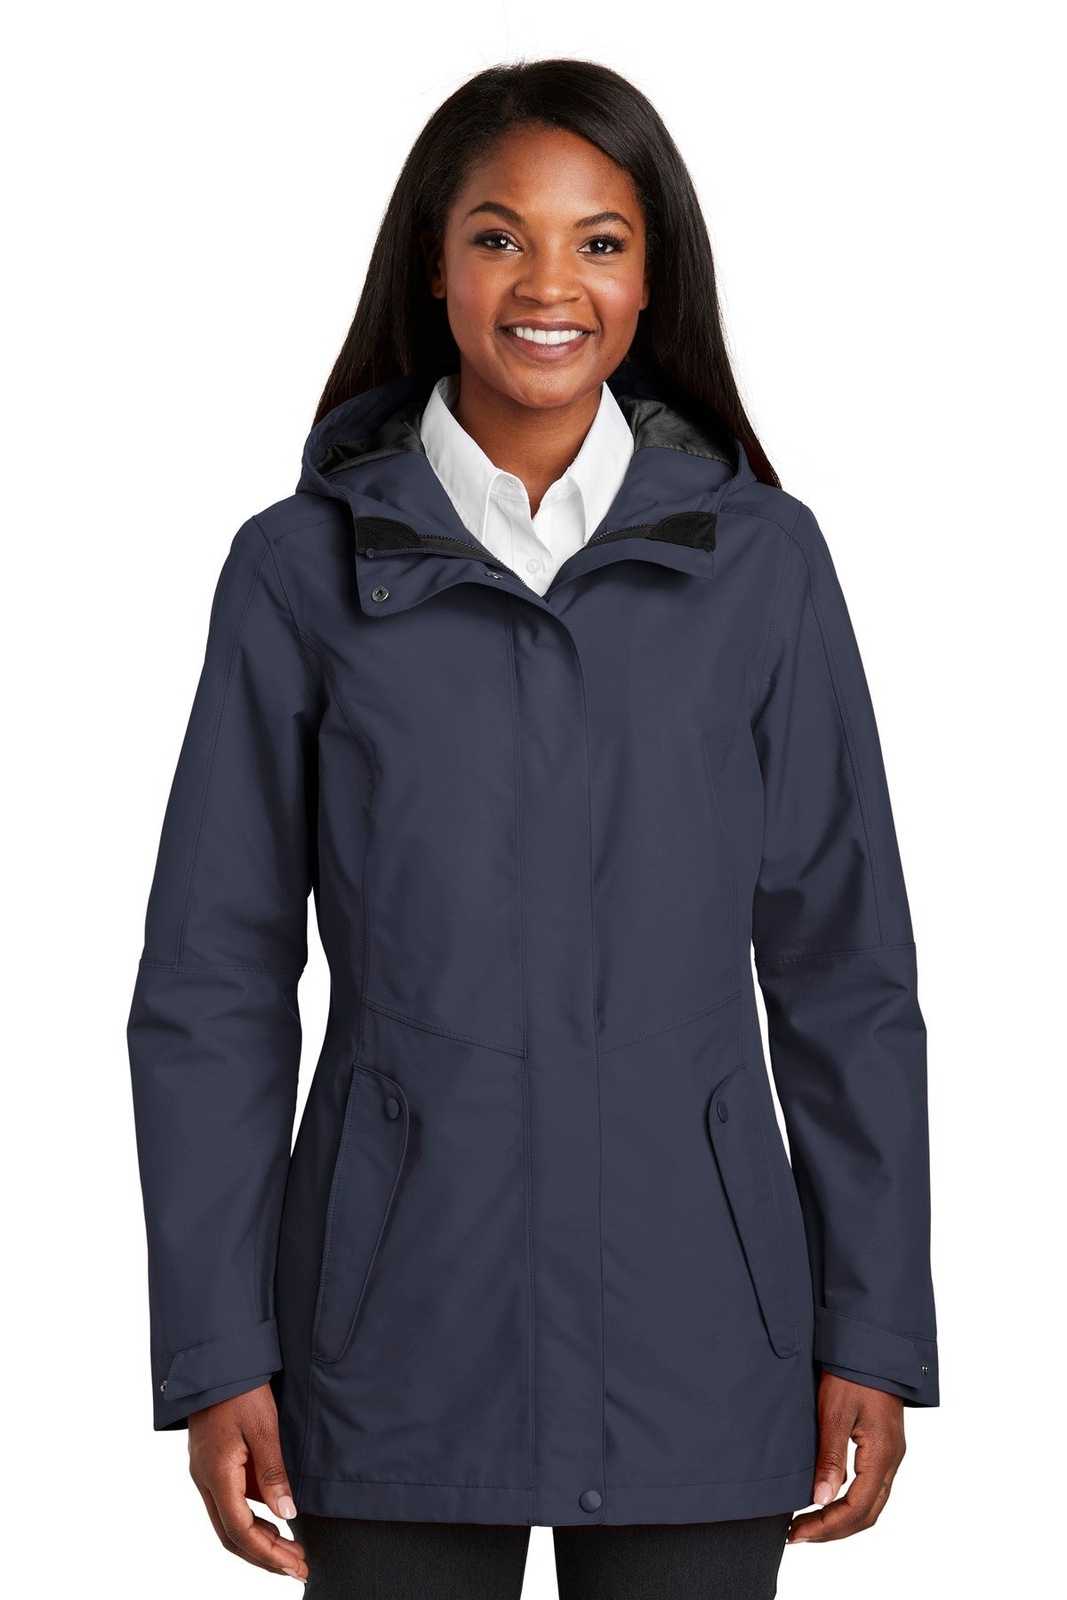 Port Authority L900 Ladies Collective Outer Shell Jacket - River Blue Navy - HIT a Double - 1